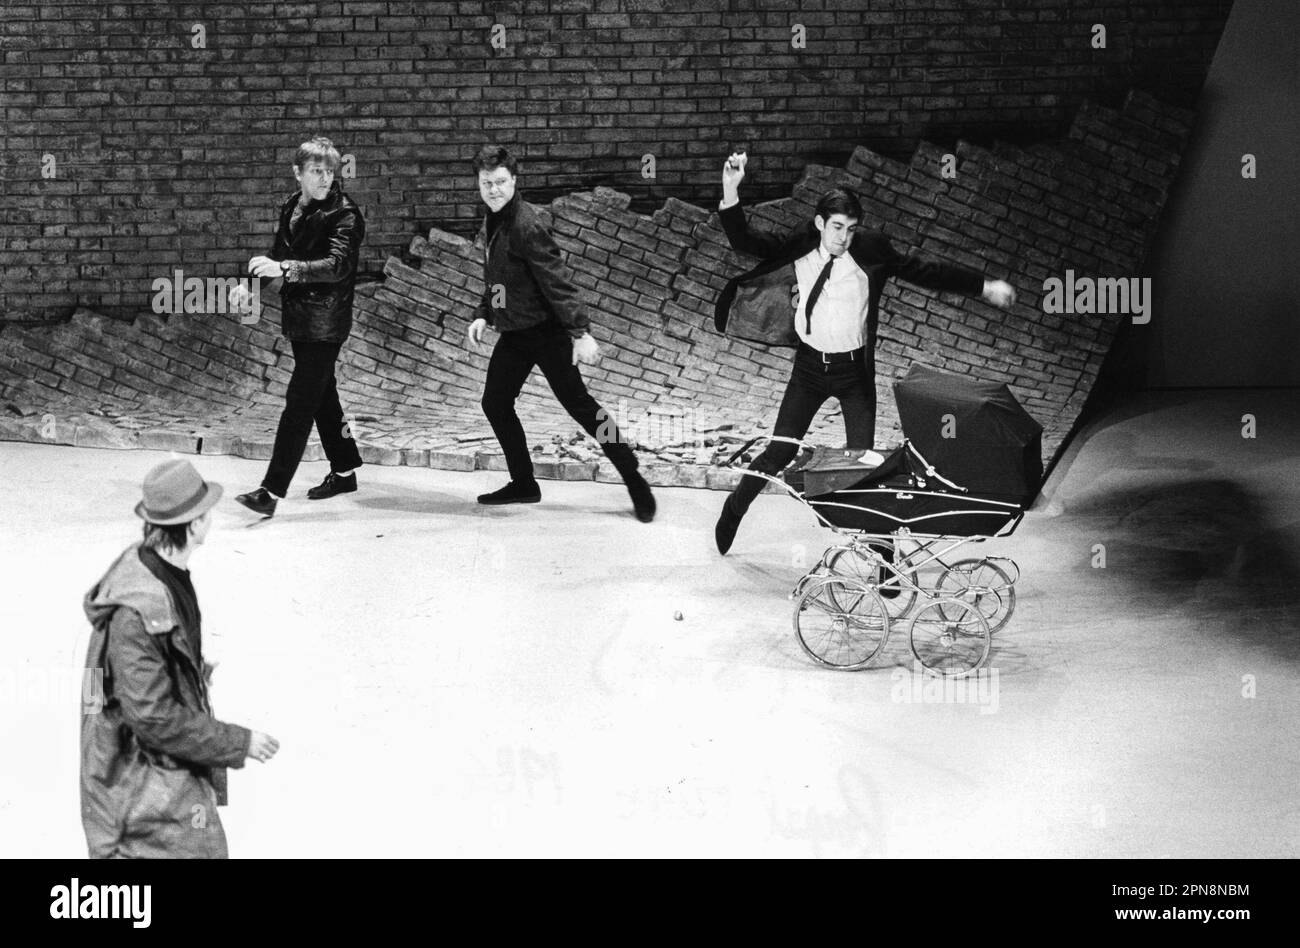 the baby stoning scene - l-r: Gary Oldman (Mike - front), Mark Wingett (Fred), Gary Olsen (Pete), Gerard Horan (Barry) in SAVED by Edward Bond at the Royal Court Theatre, London SW1  1984  set design: Peter Hartwell  costumes: Jennifer Cook  lighting: Andy Phillips  director: Danny Boyle Stock Photo